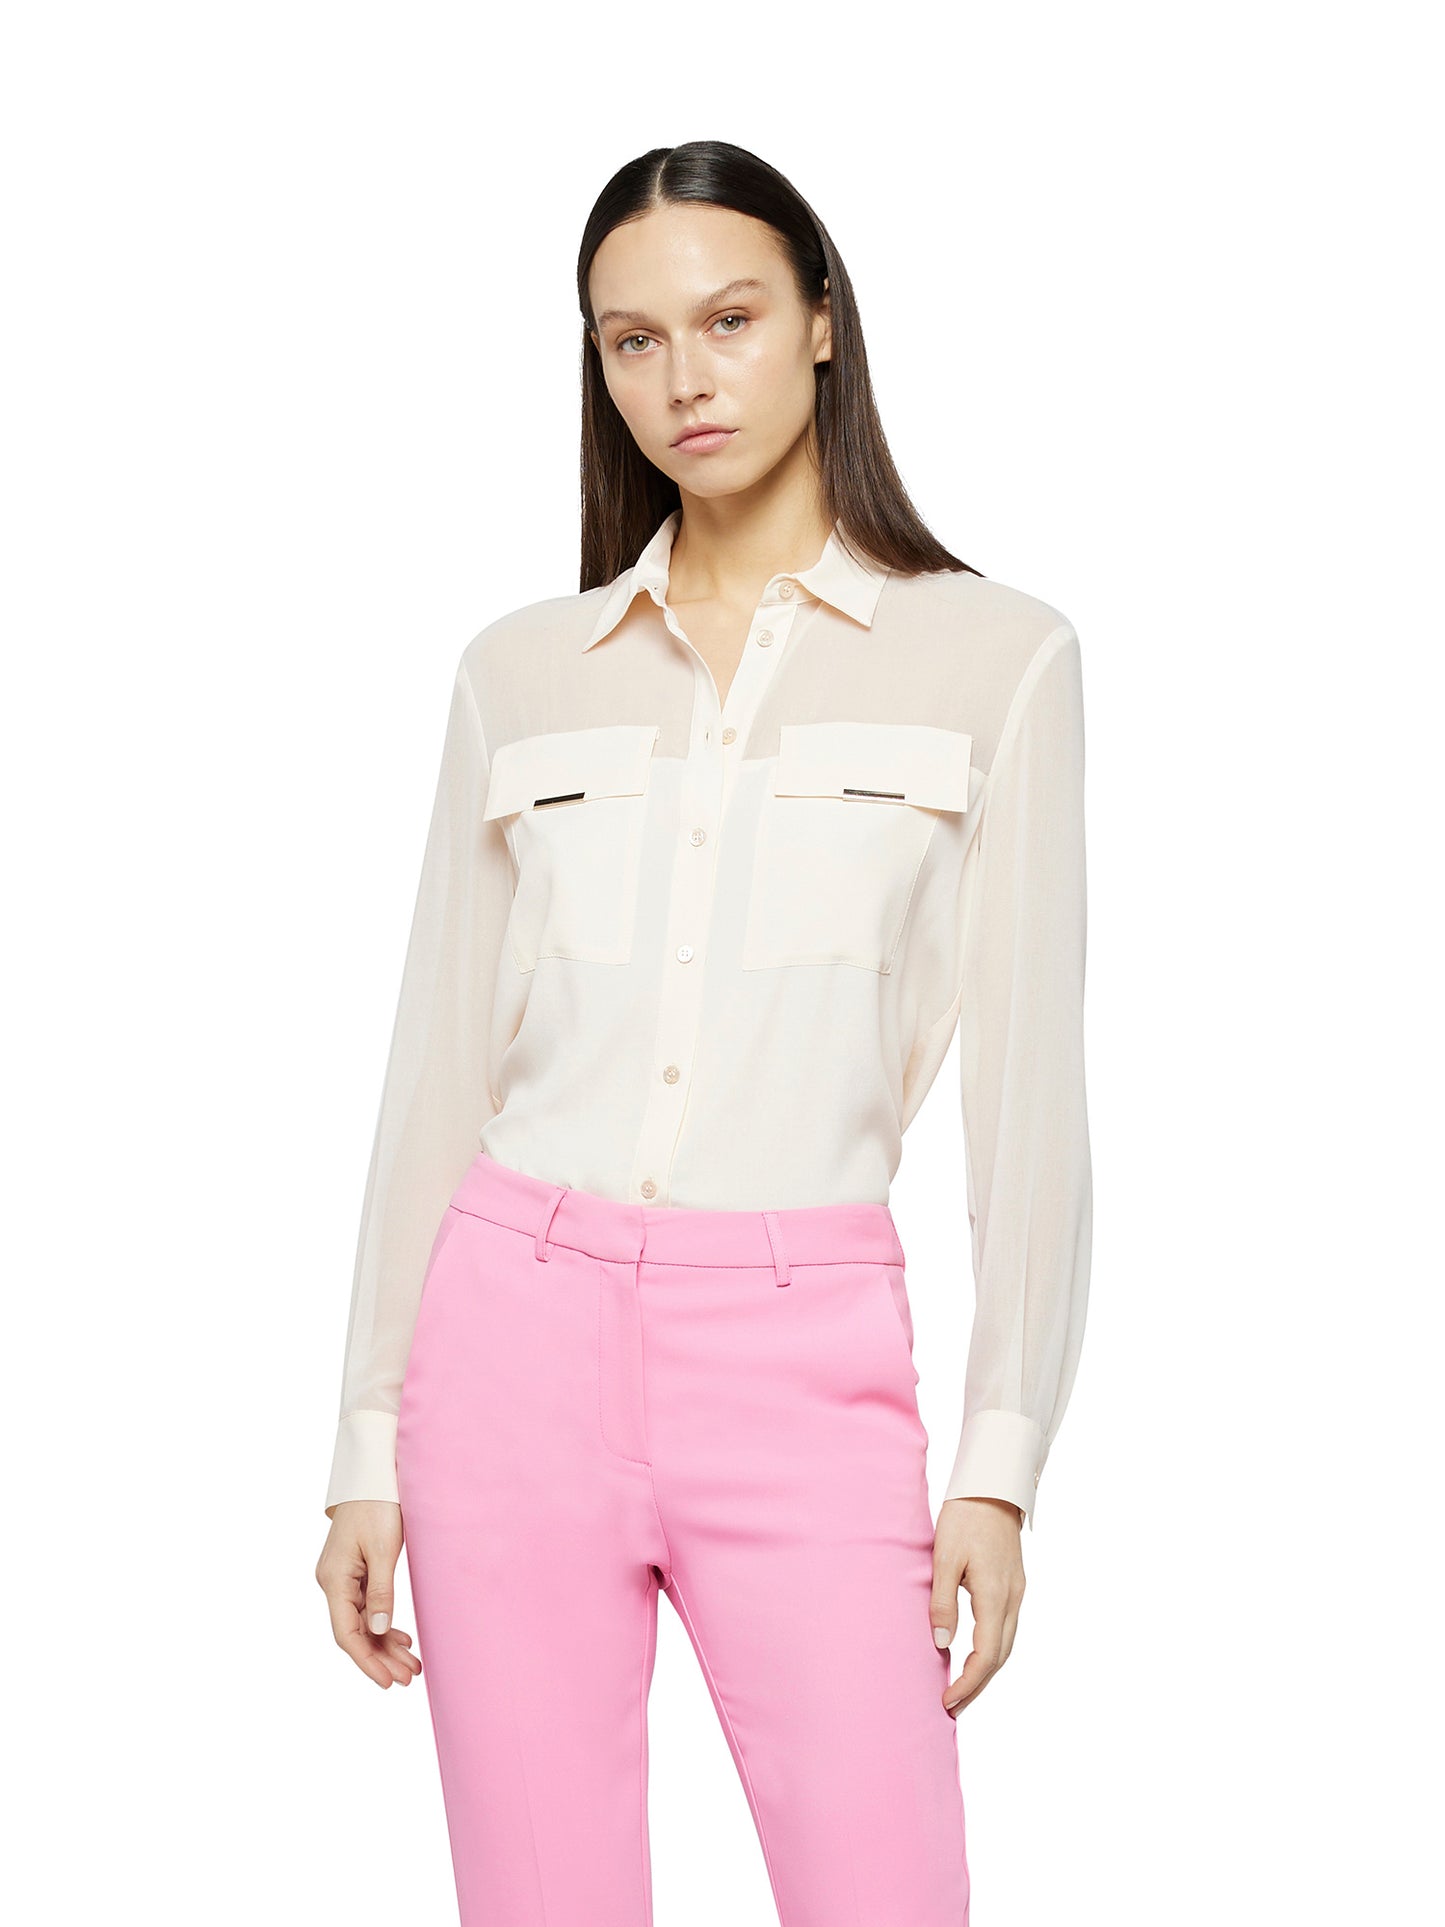 Silk acetate and georgette see-through shirt